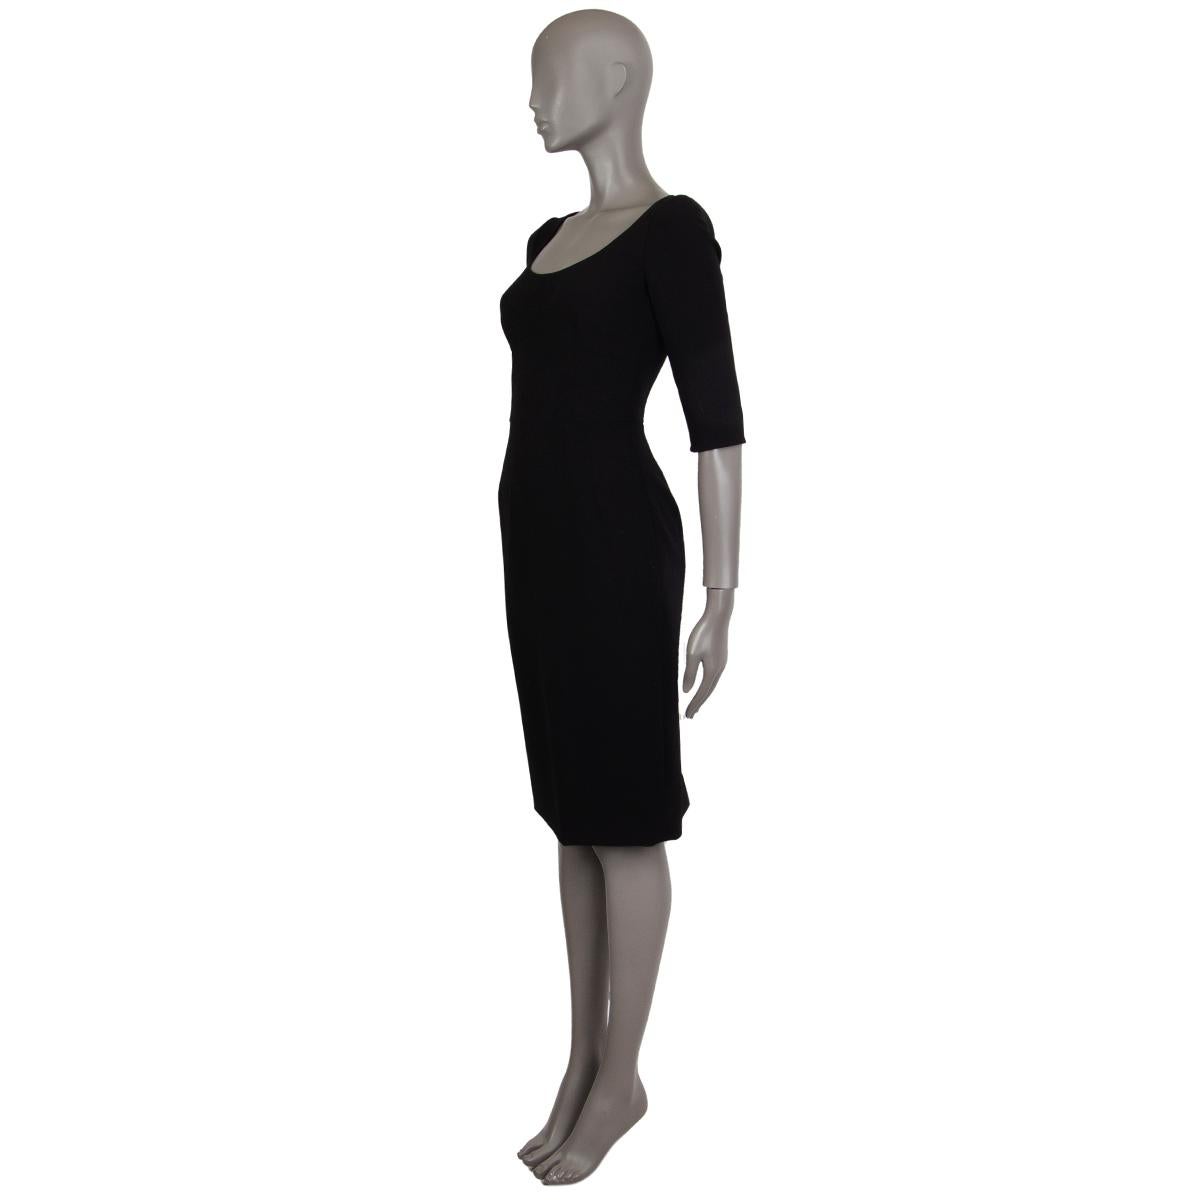 Dolce & Gabbana classic sheath dress in black missing tag (probably wool blend) with a detailed seamed top, round-cut neckline, fitted silhouette, 3/4 sleeve length and slit in the back. Closes with a concealed zipper in the back. Lined in black